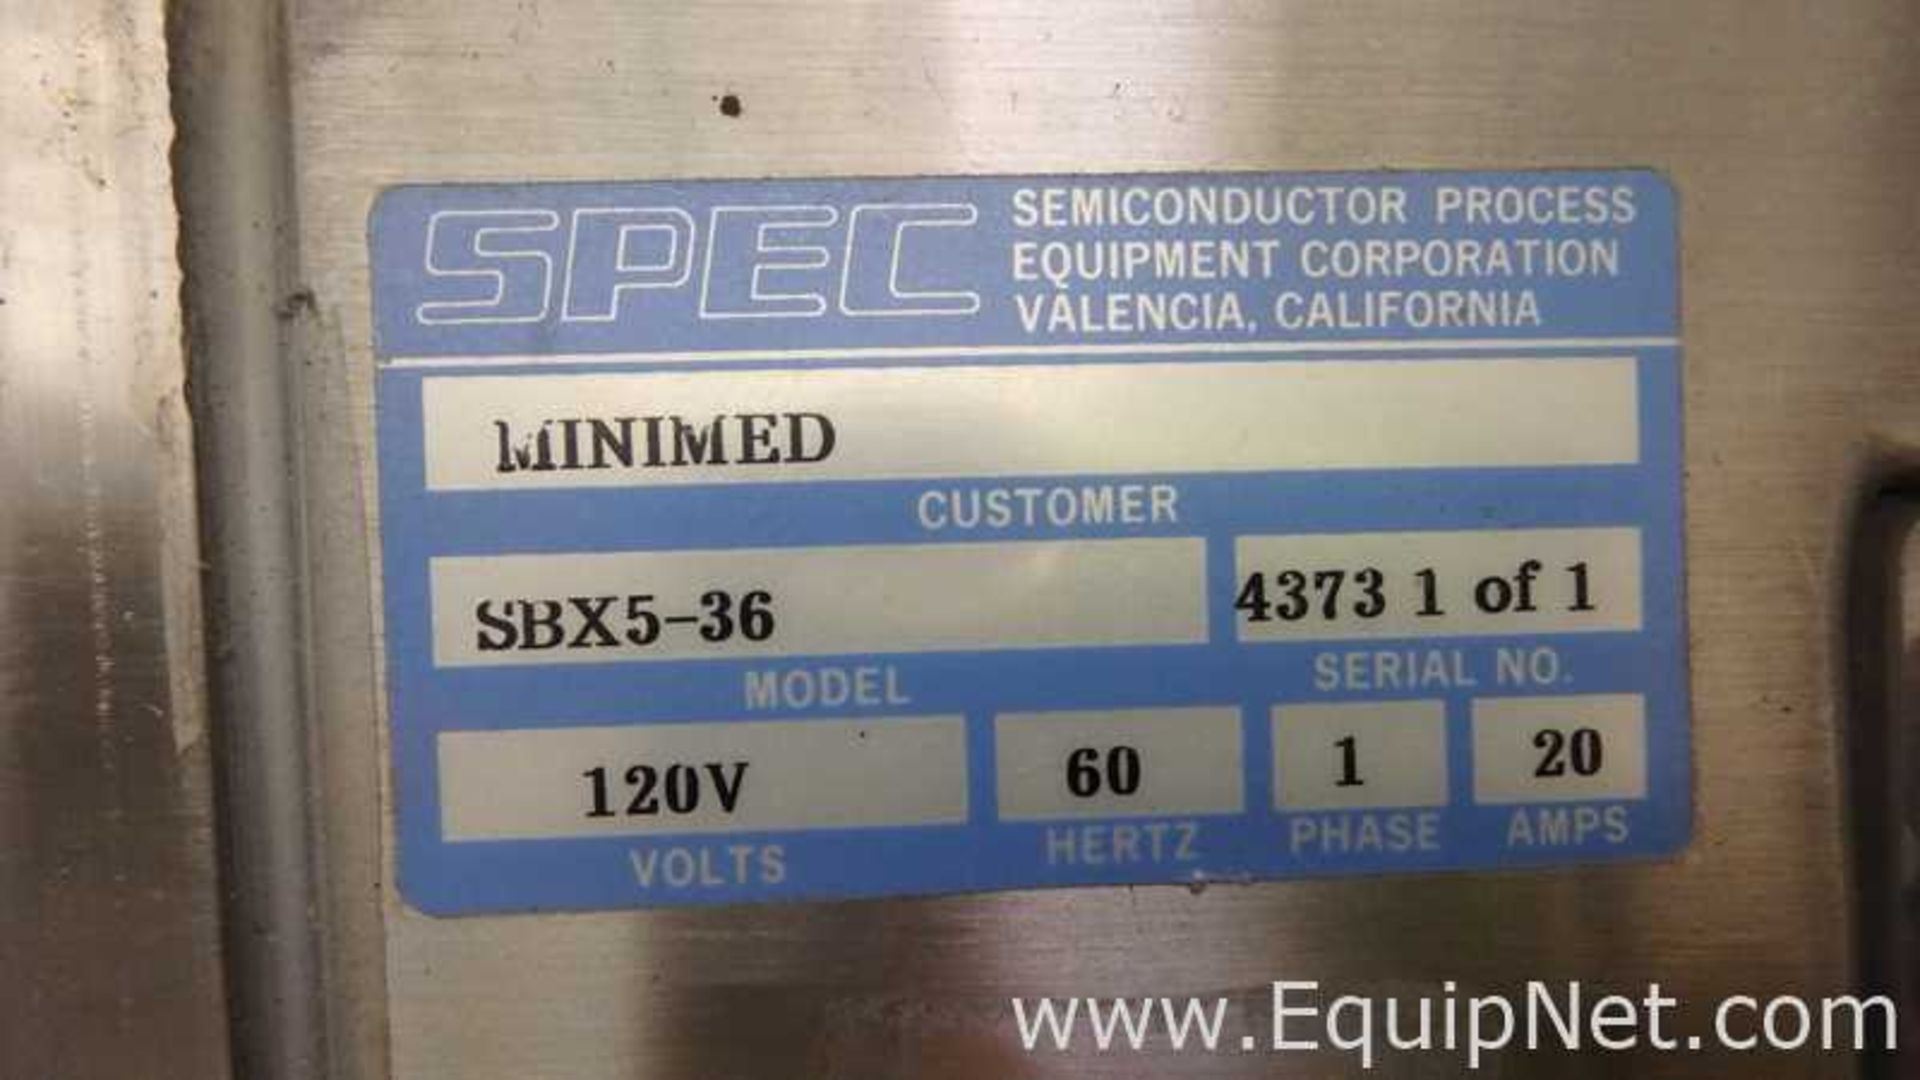 SPEC Semiconductor Process Equipment SBX5-36 Photoresist Developer System - Image 31 of 31